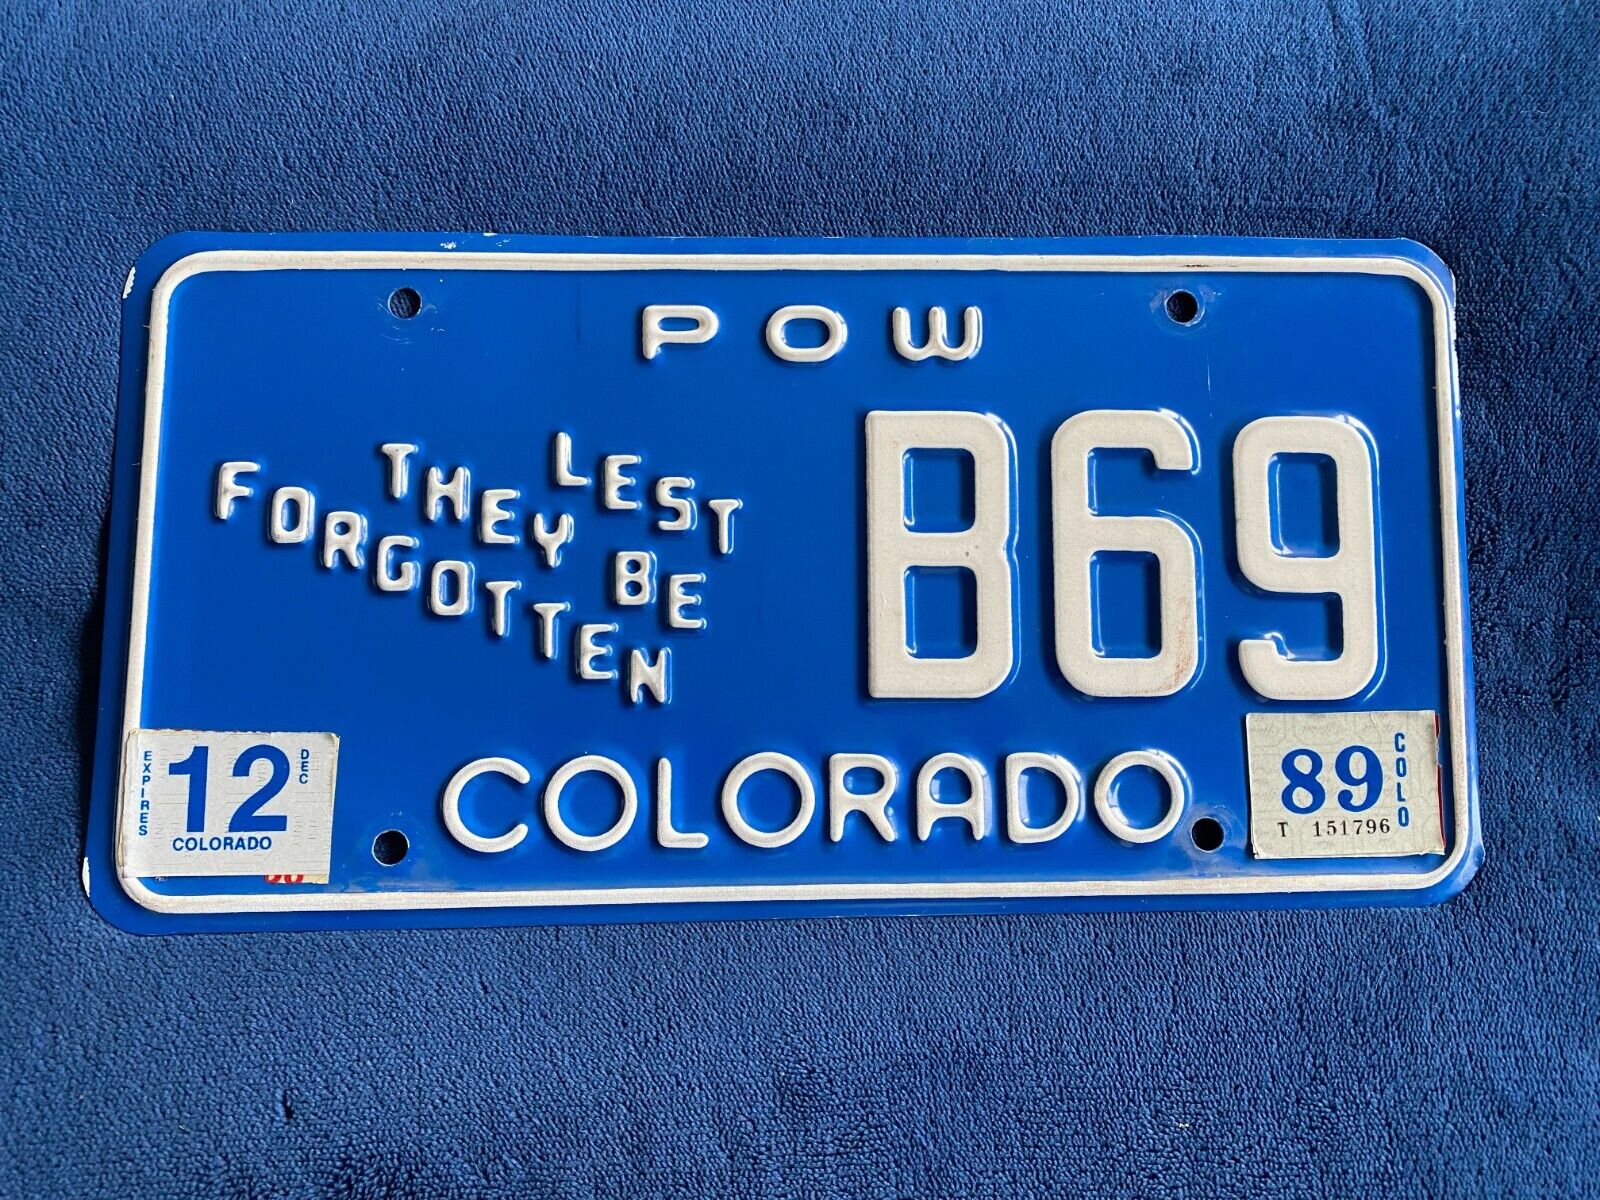 1989 Colorado POW Prisoner of War Lest They Be Forgotten License Plate # B69